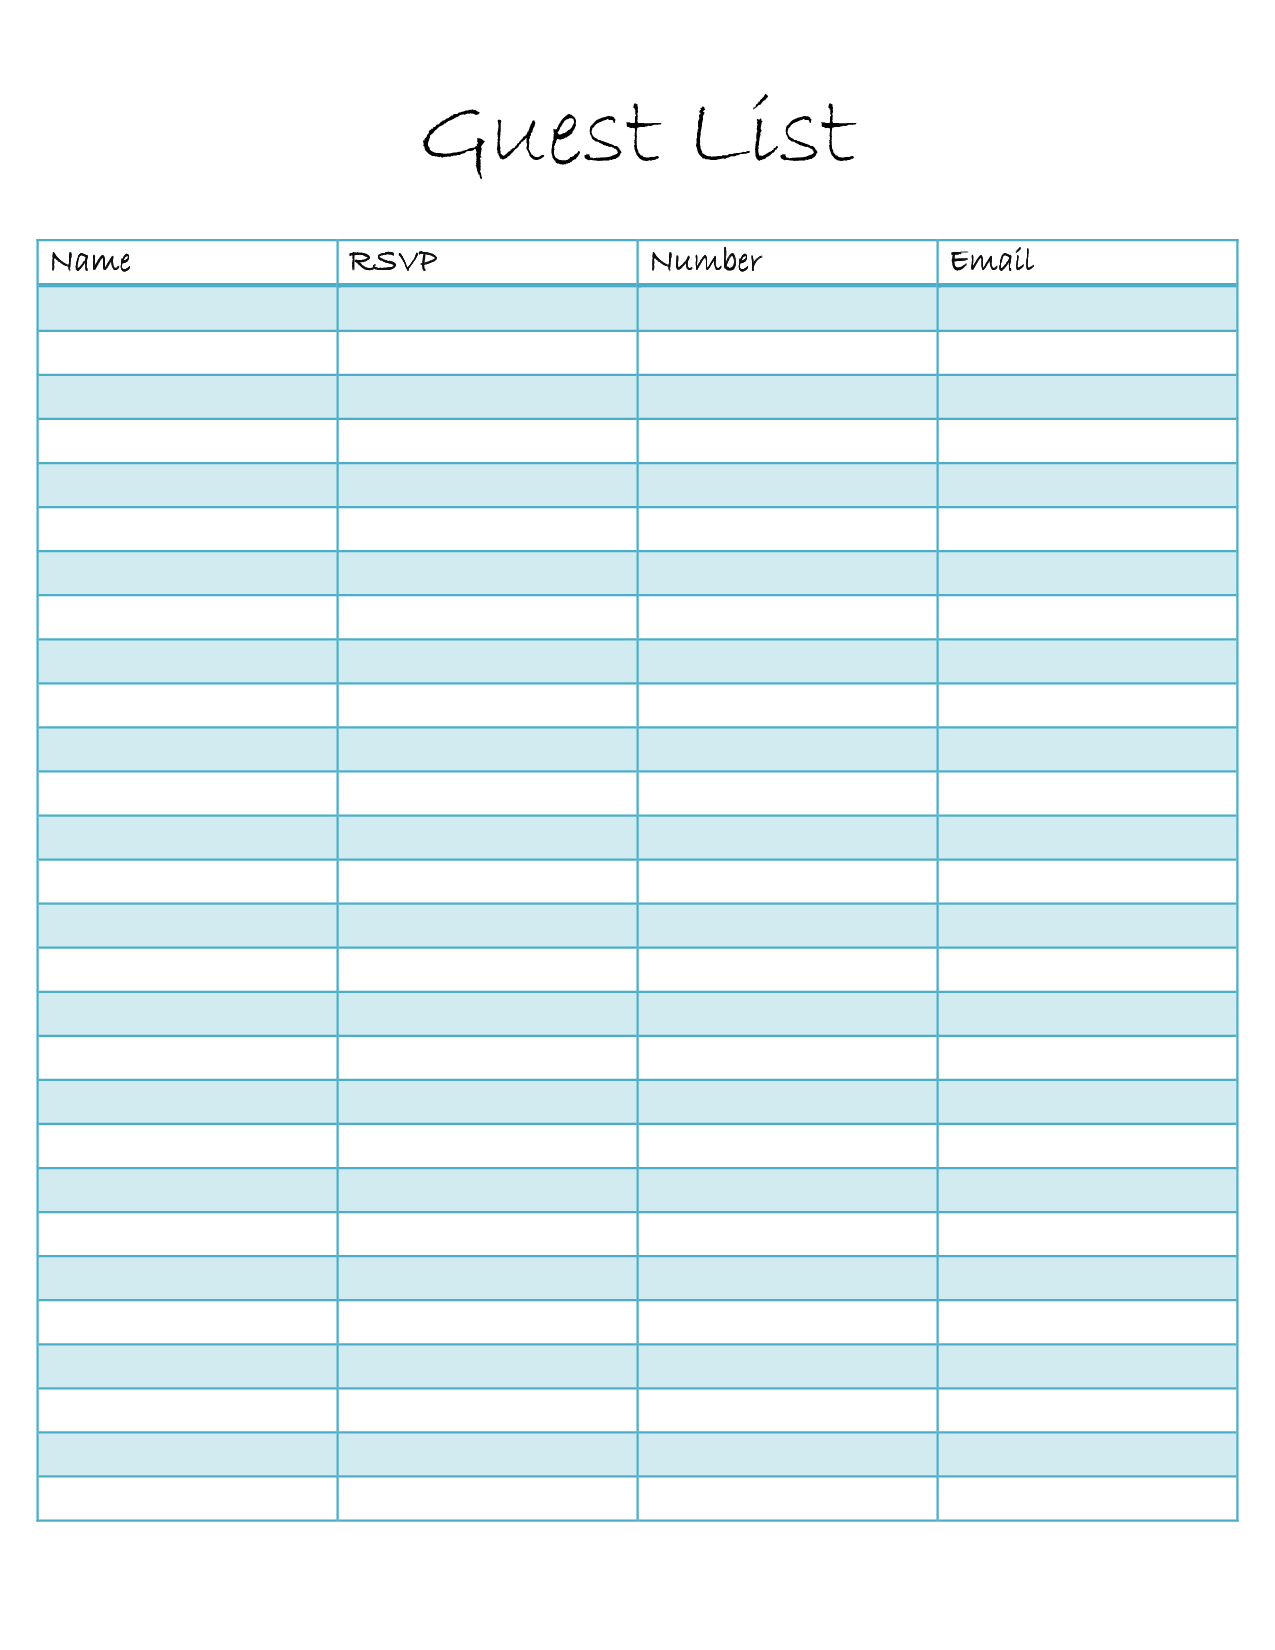 8-best-images-of-free-printable-guest-list-sheet-free-printable-guest-list-template-free